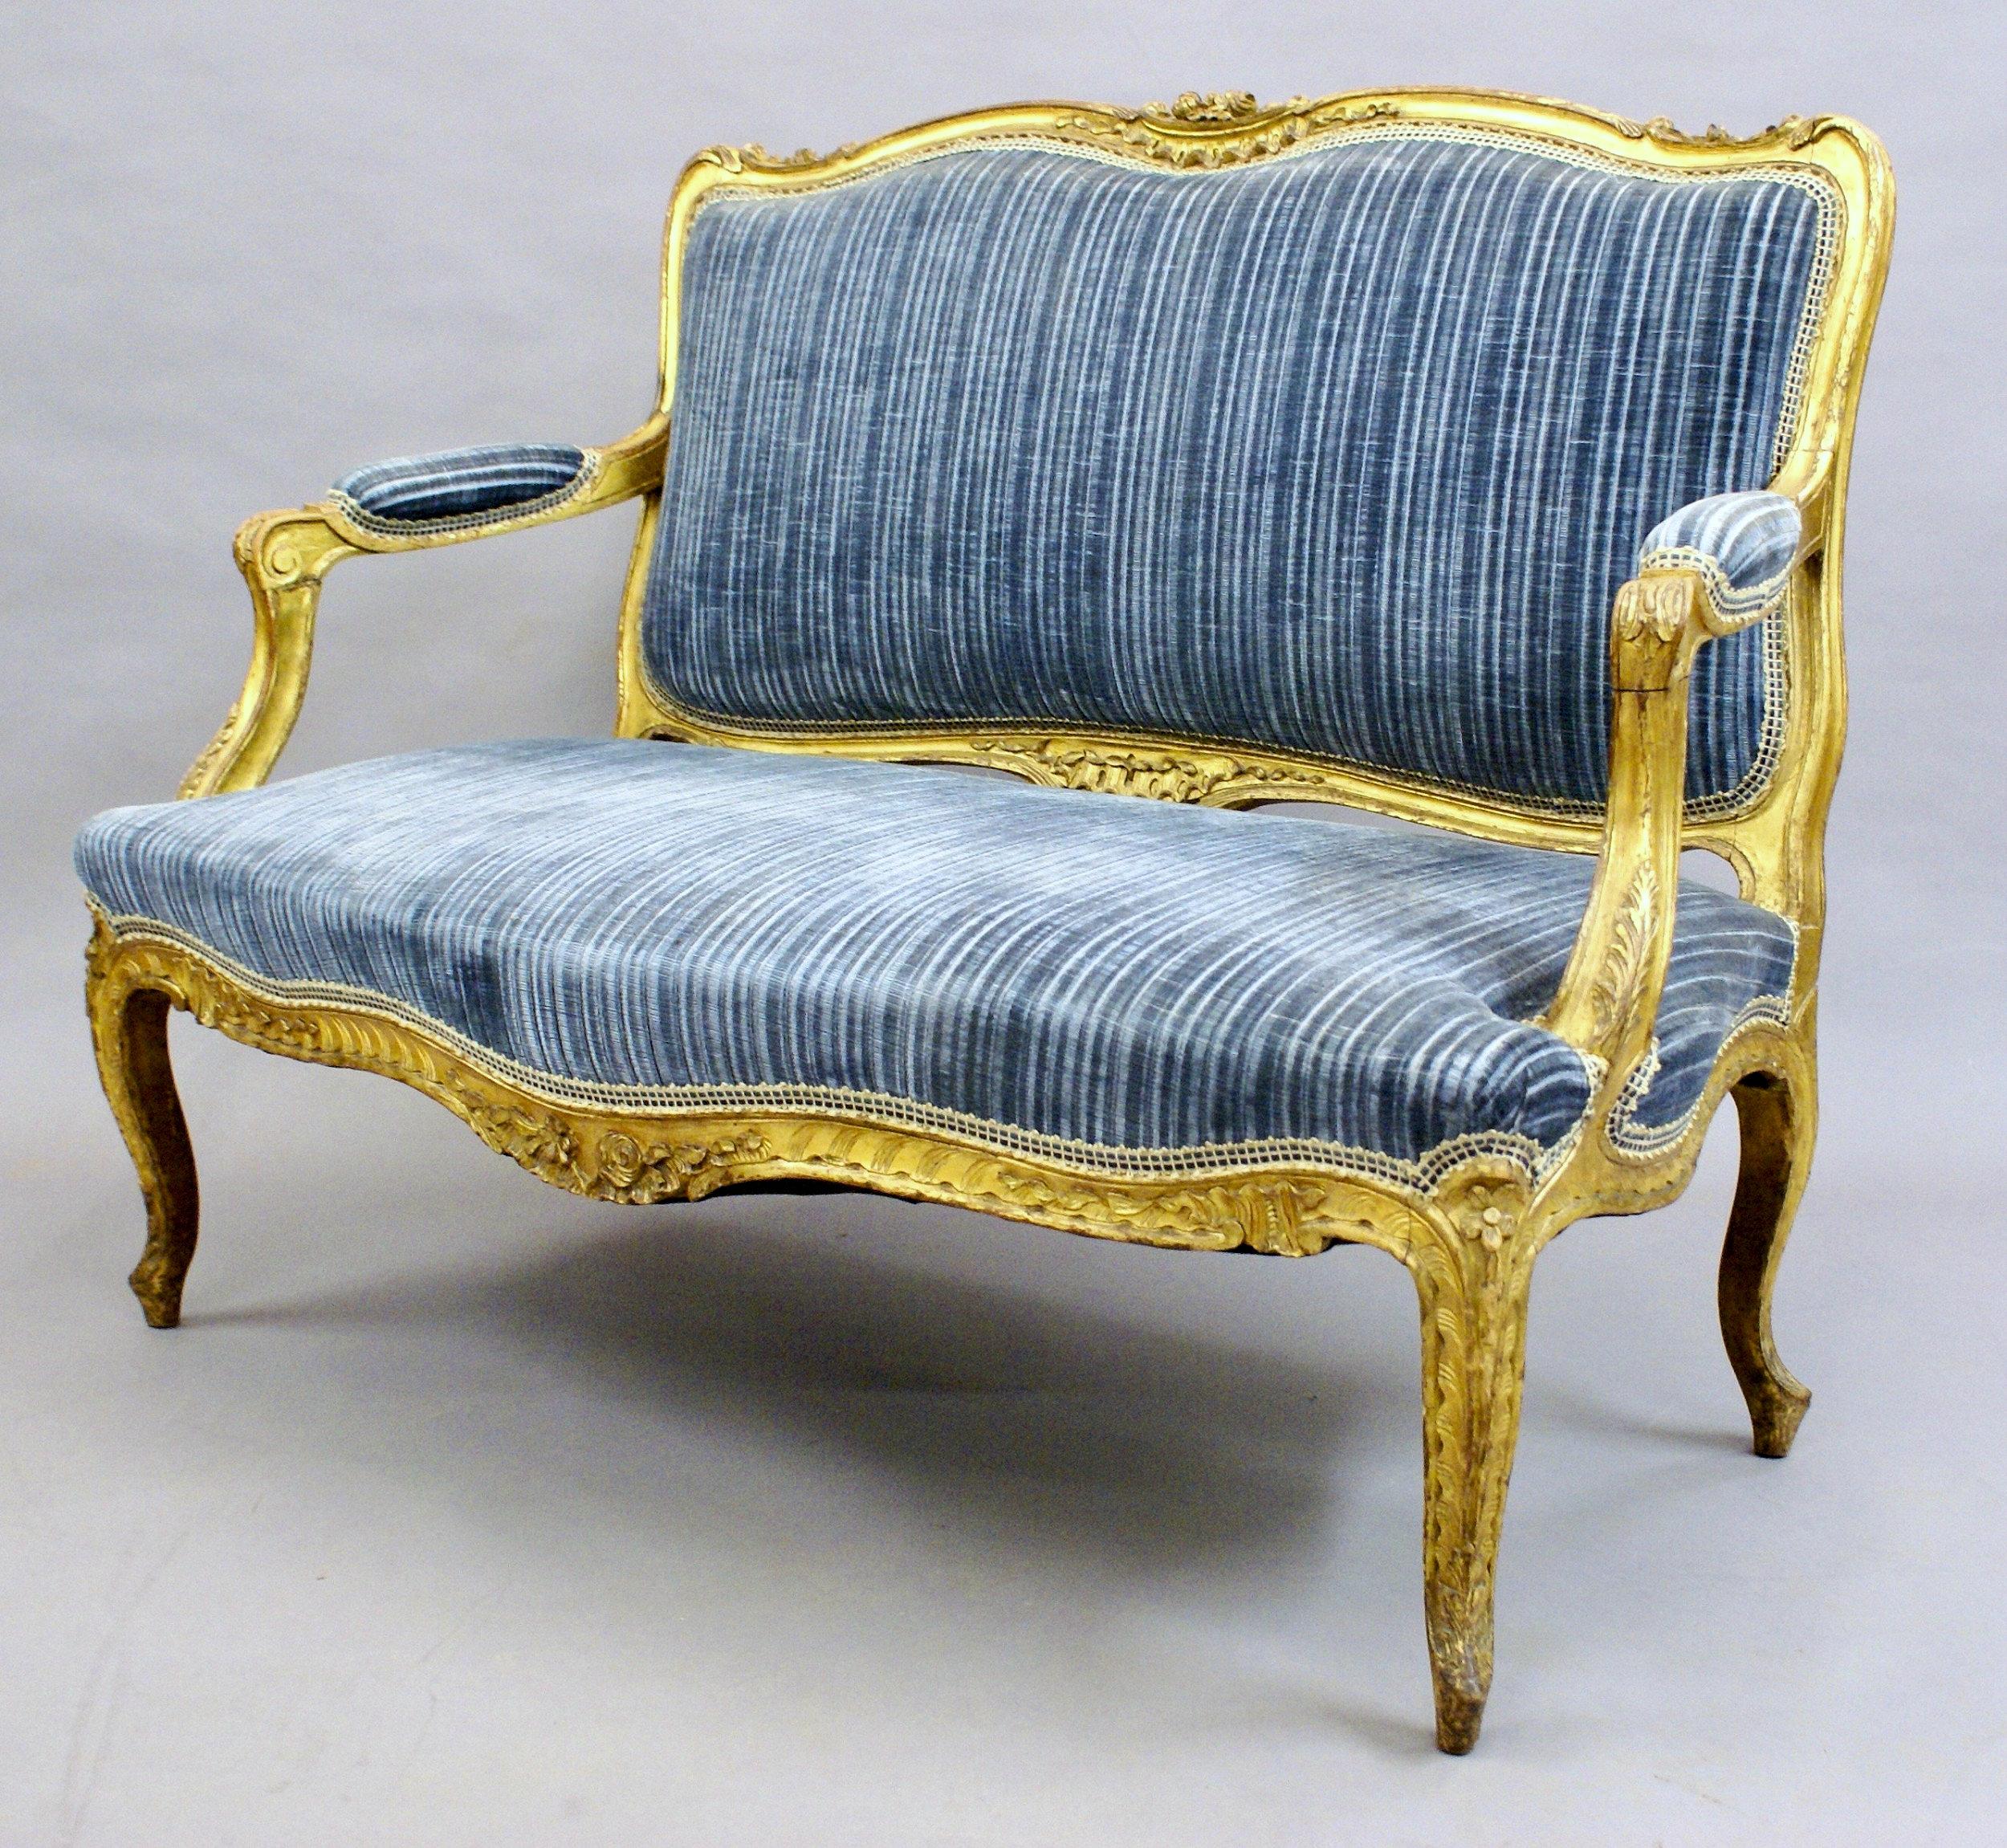 Upholstery Mid-19th Century French Giltwood Settee For Sale